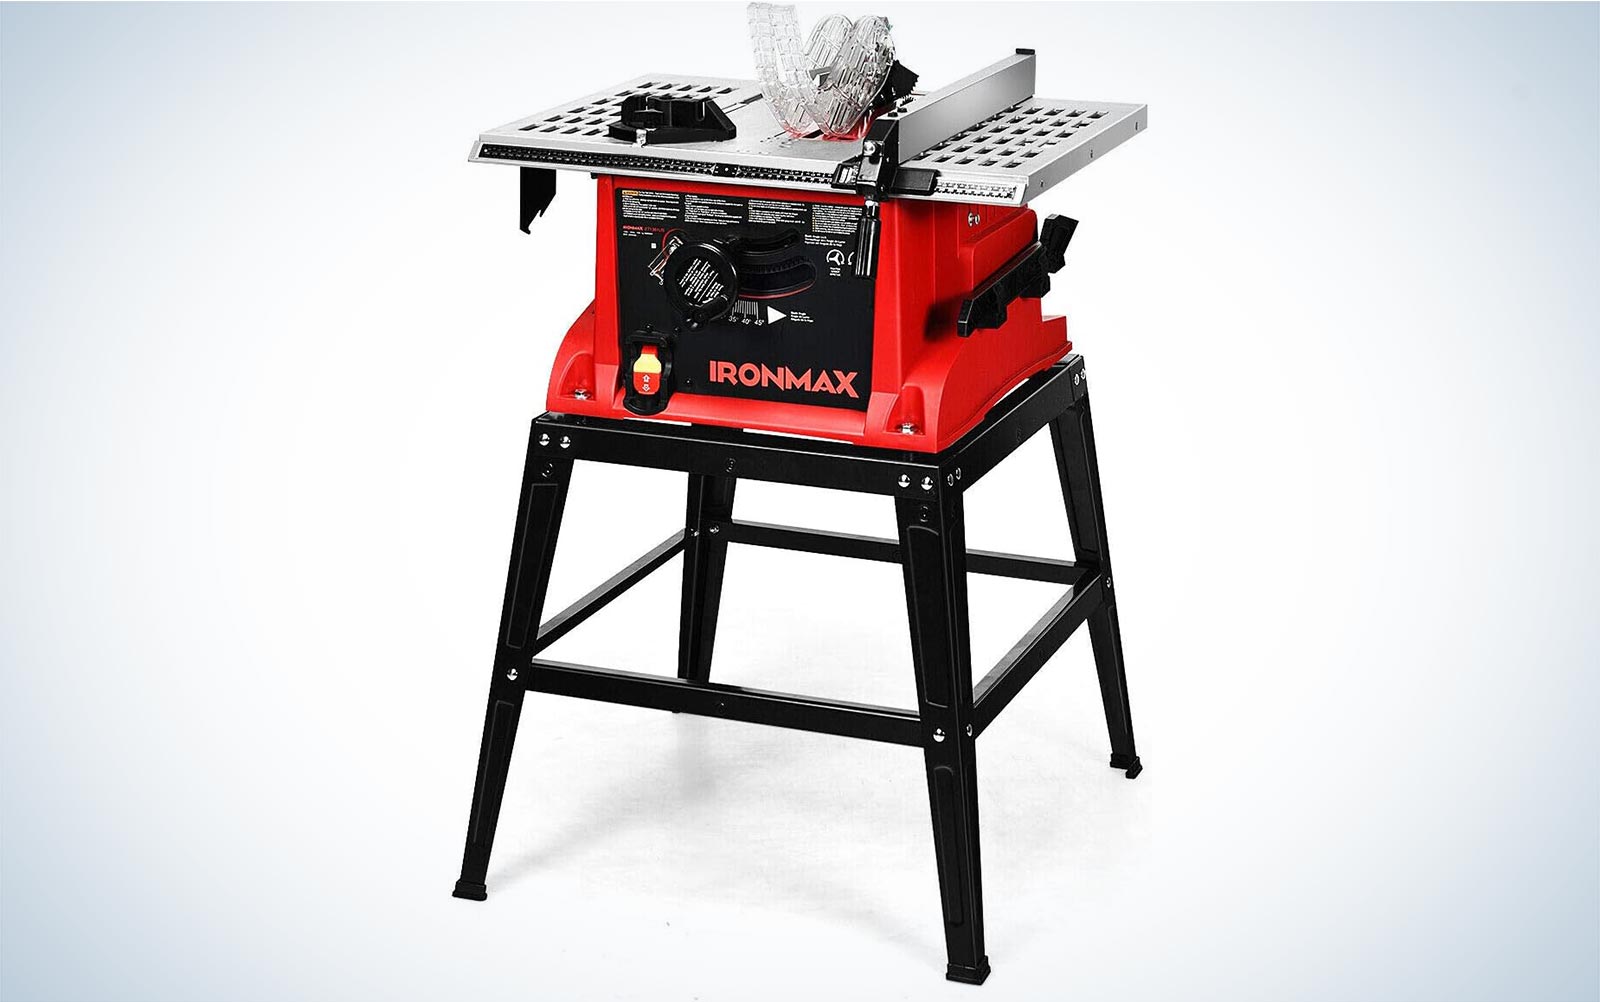 The GoPlus Ironmax 10-Inch Table Saw standing on a plain background